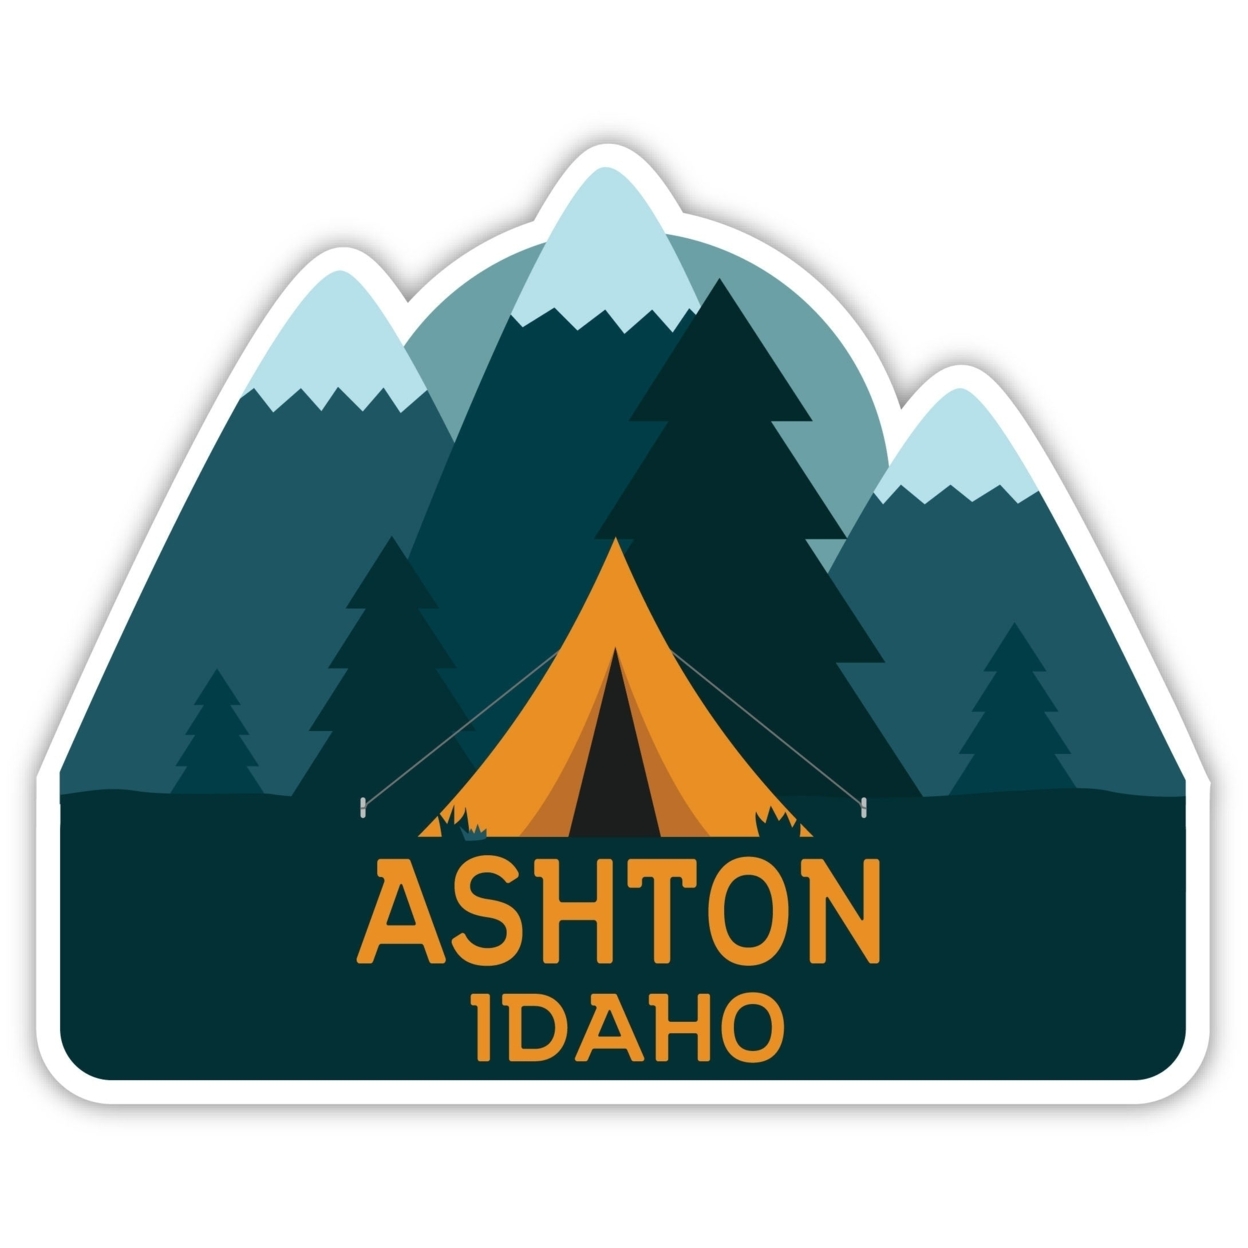 Ashton Idaho Souvenir Decorative Stickers (Choose Theme And Size) - 4-Pack, 4-Inch, Great Outdoors